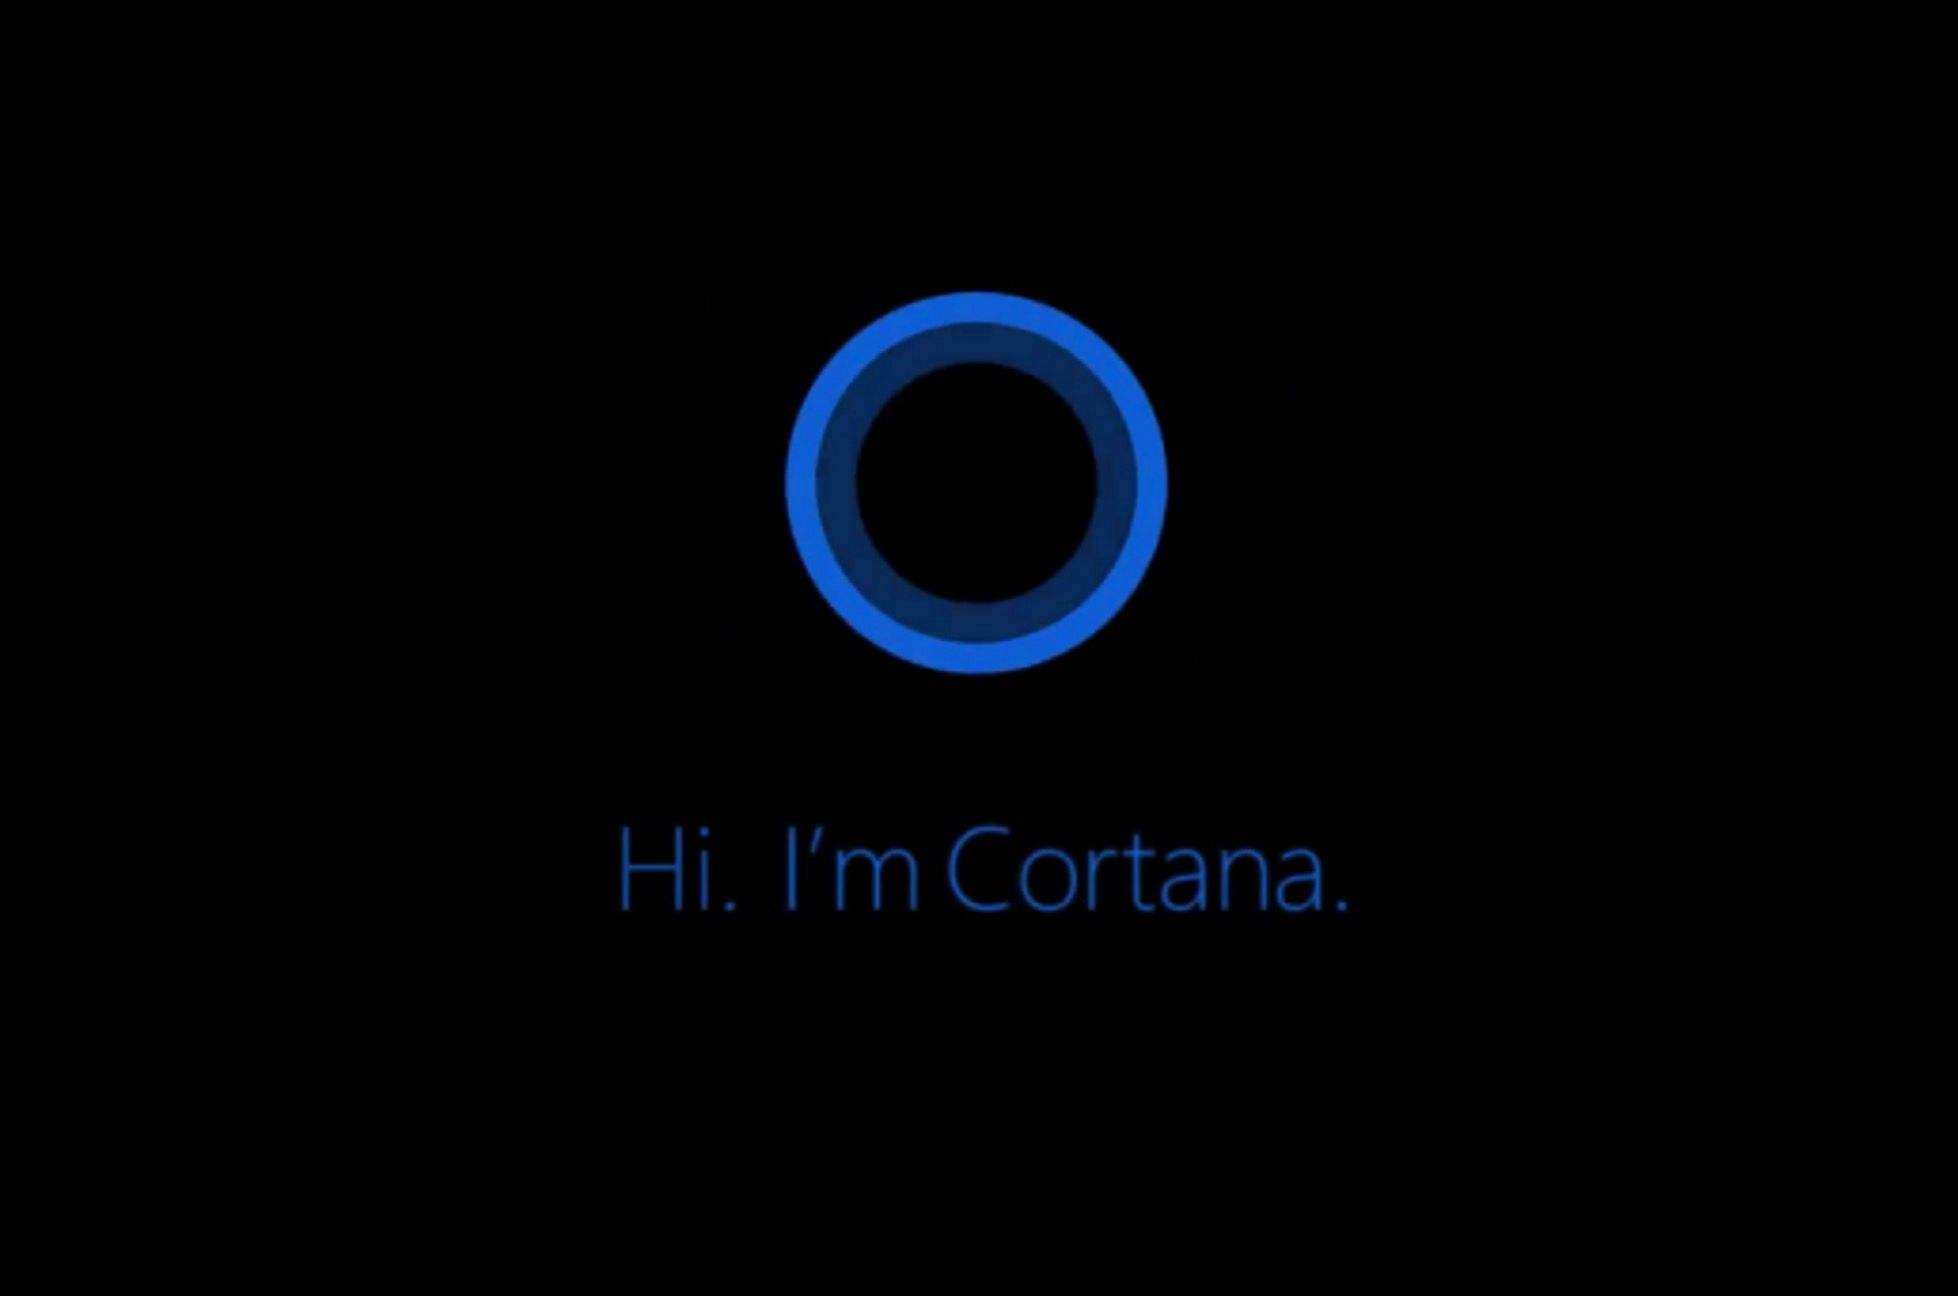 Leaked video shows Microsoft is giving Cortana a masculine voice image 1